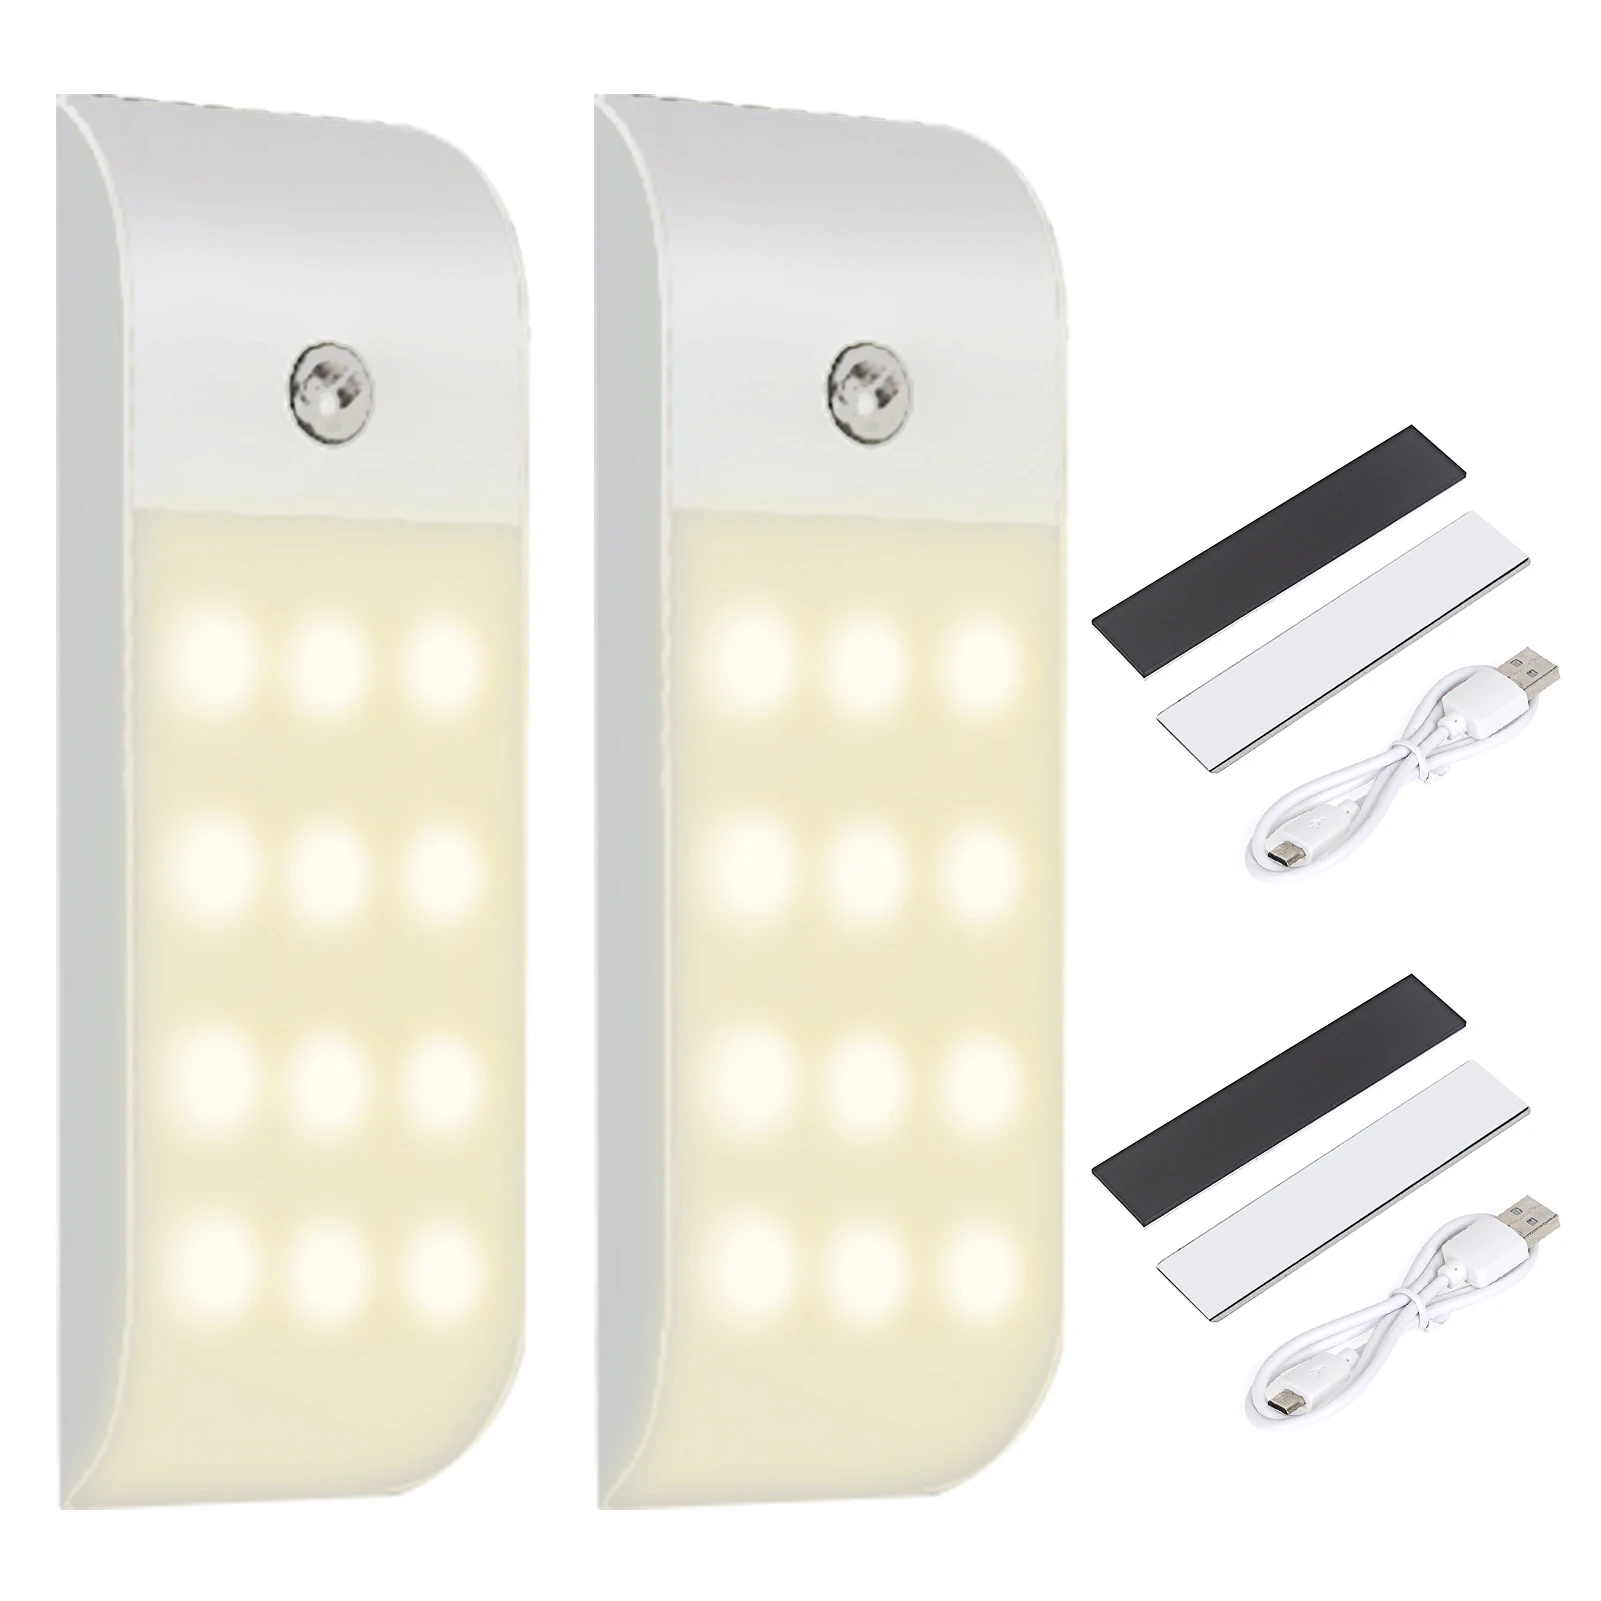 

2pack 12 LED 3 Modes With Magnetic Strip Motion Sensor Stick-on USB Rechargeable Stair Hallway Wardrobe Night Light Cupboard